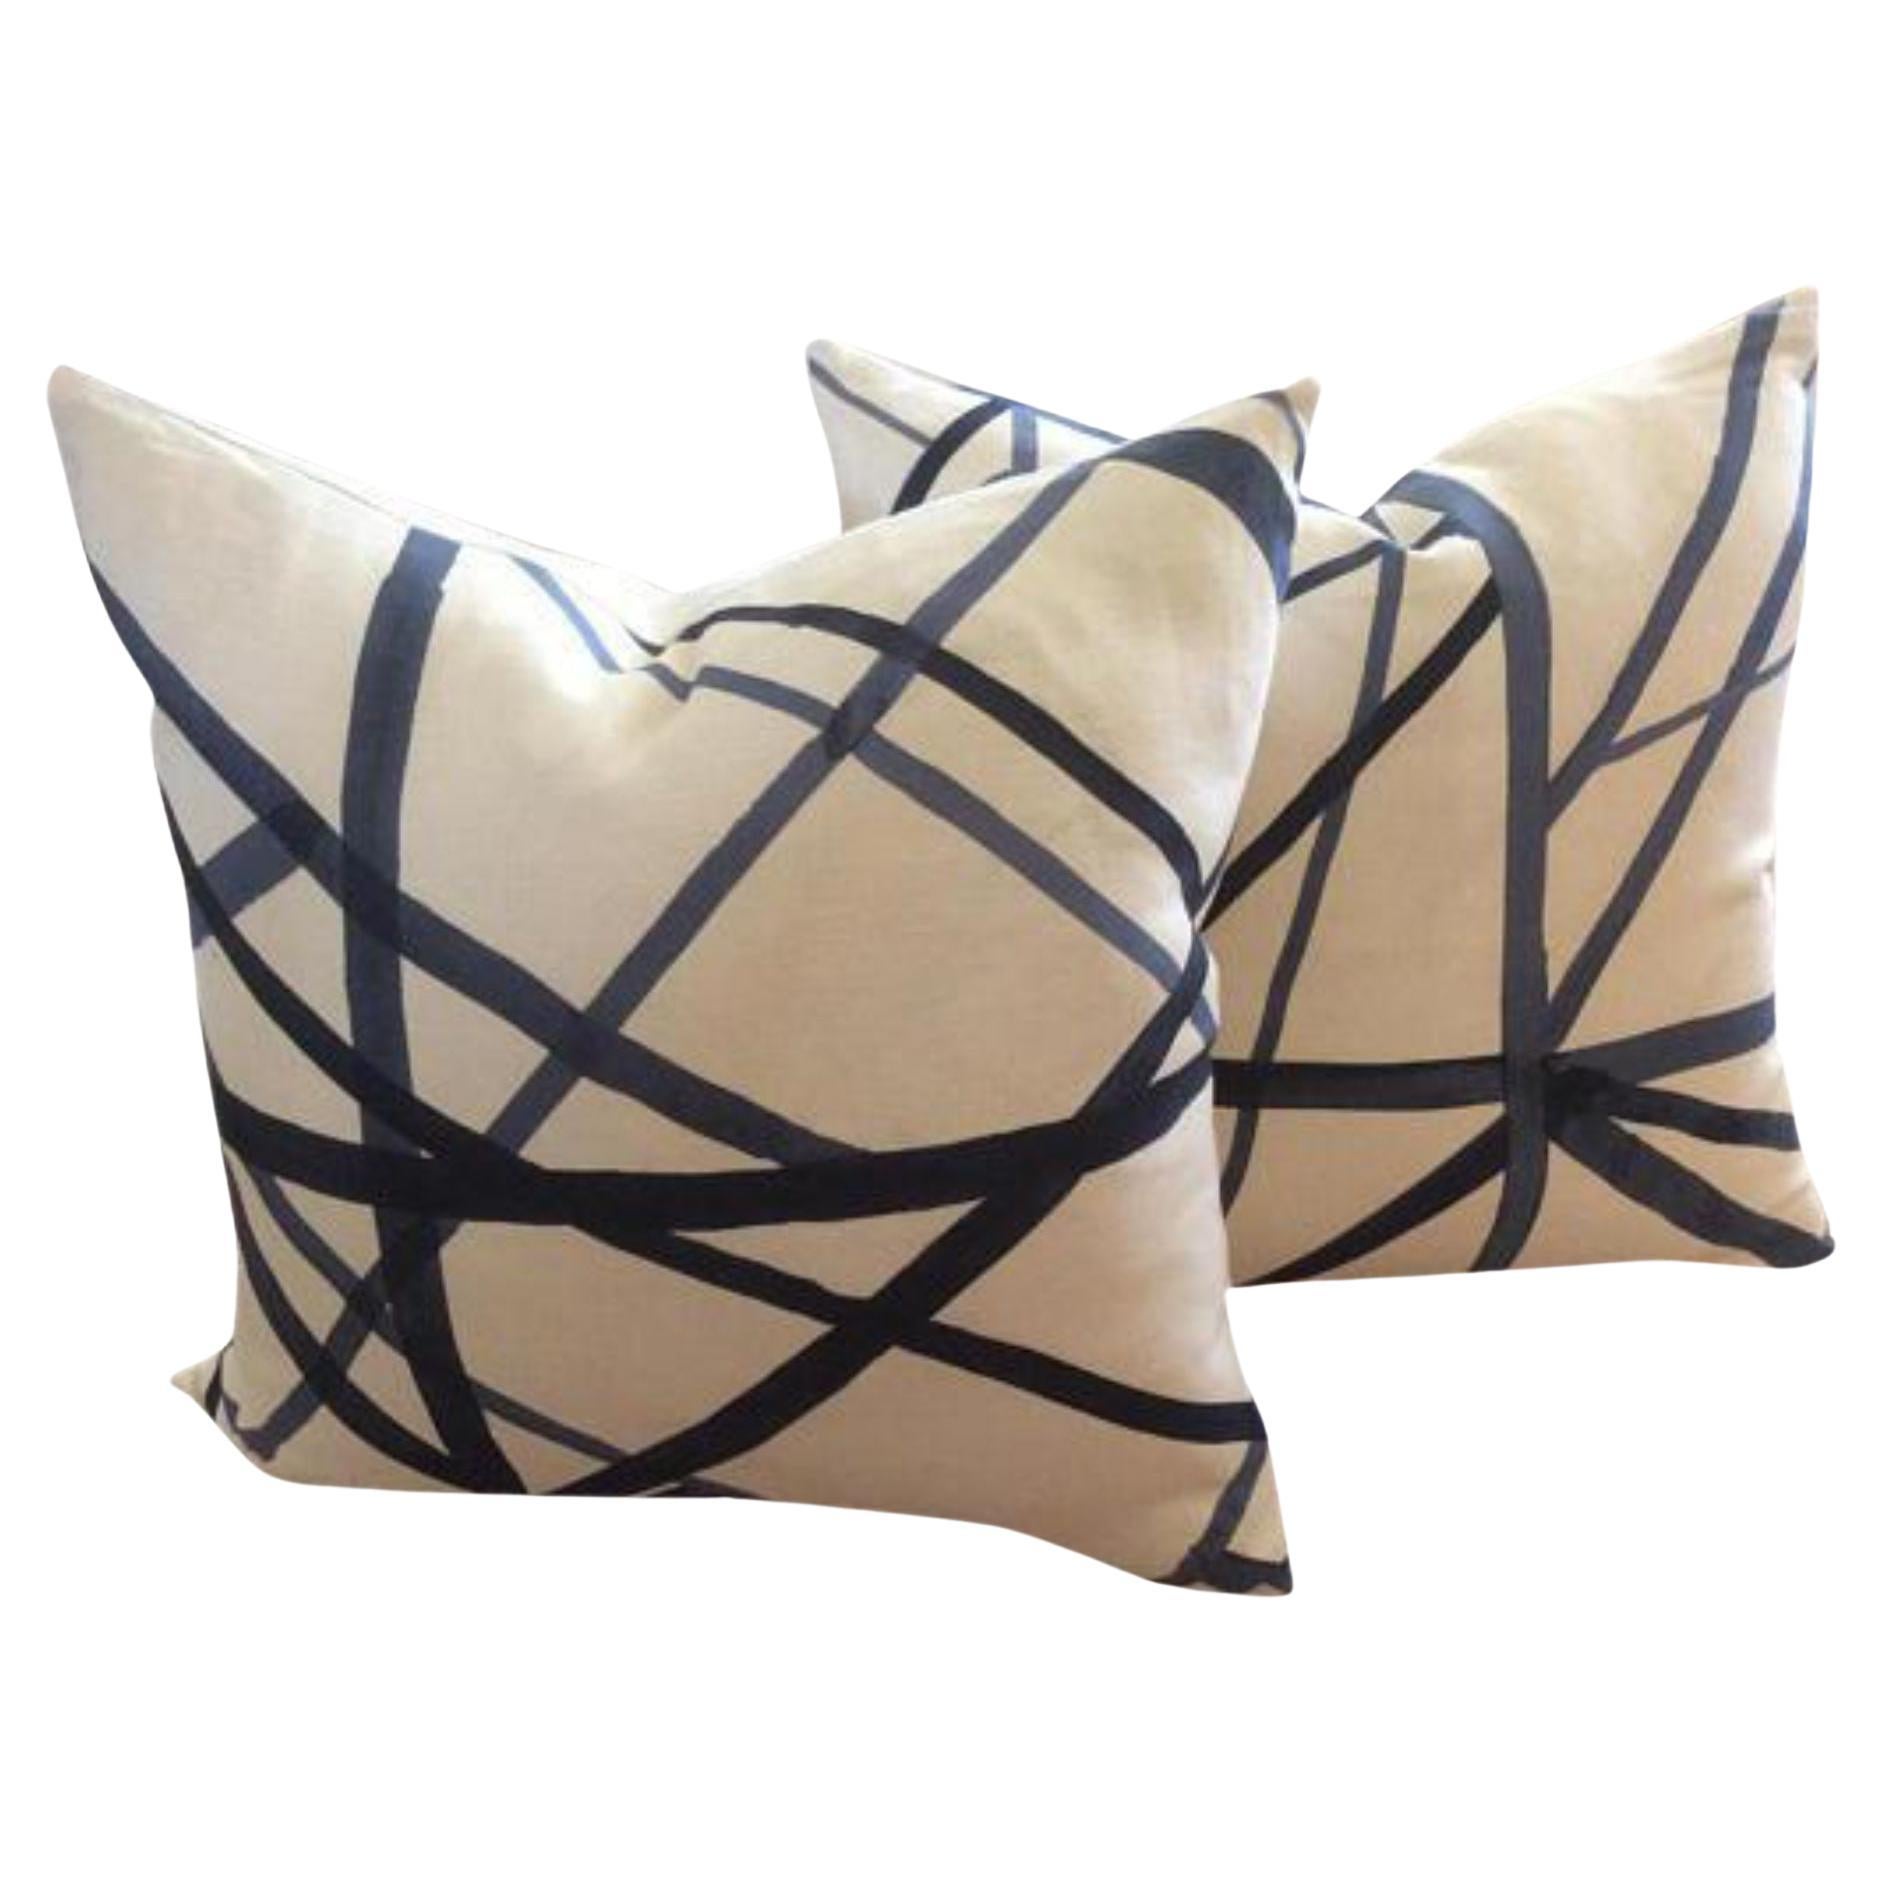 Contemporary "Channels" Pillows for Lee Jofa Groundworks in Blue - a Pair